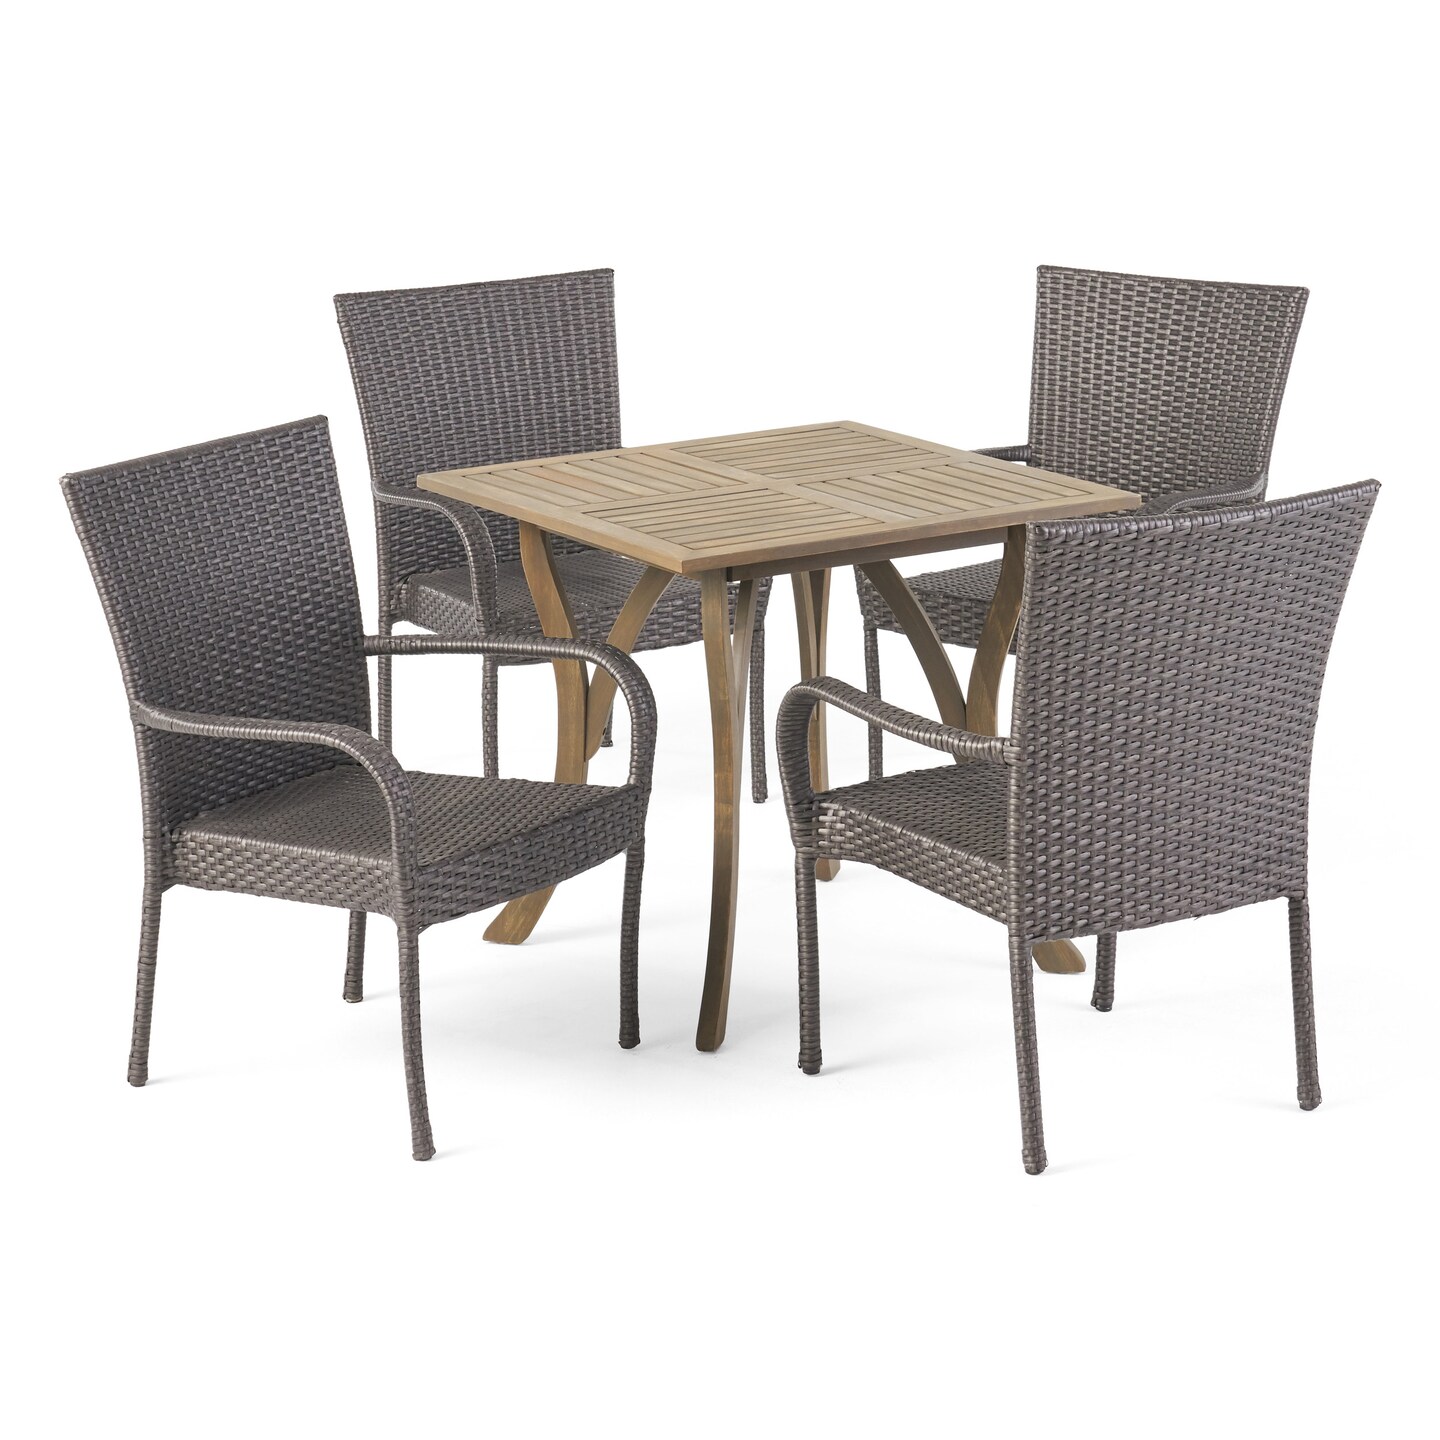 Contemporary Home Living 5-Piece Gray and Brown Wicker Outdoor Furniture Patio Dining Set